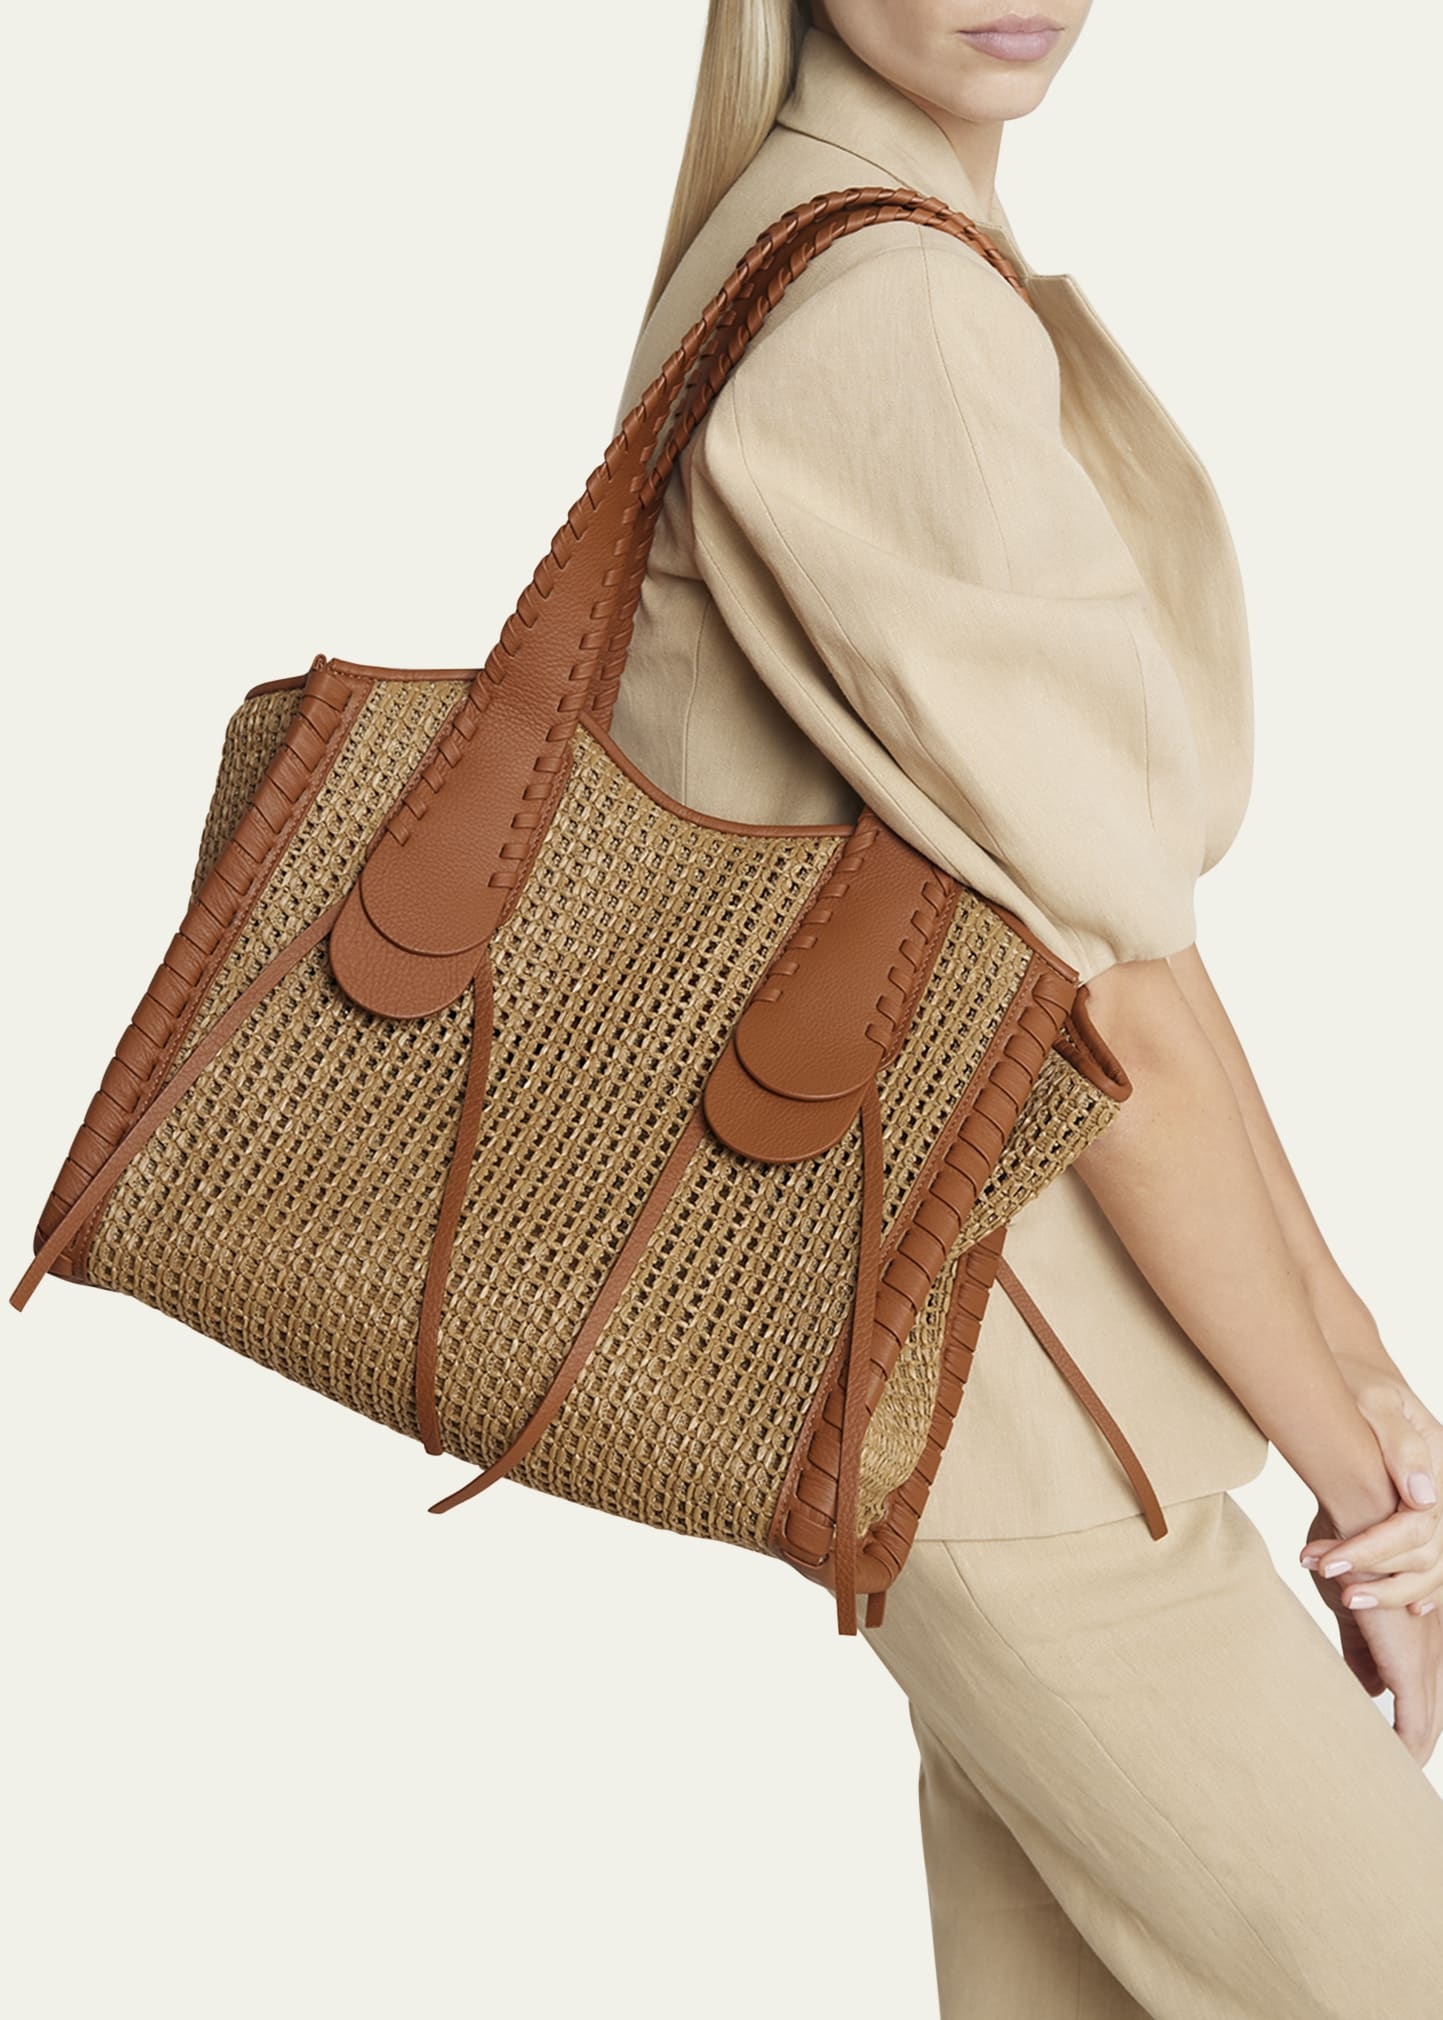 Monty Tote Bag in Raffia and Calfskin Leather - 2